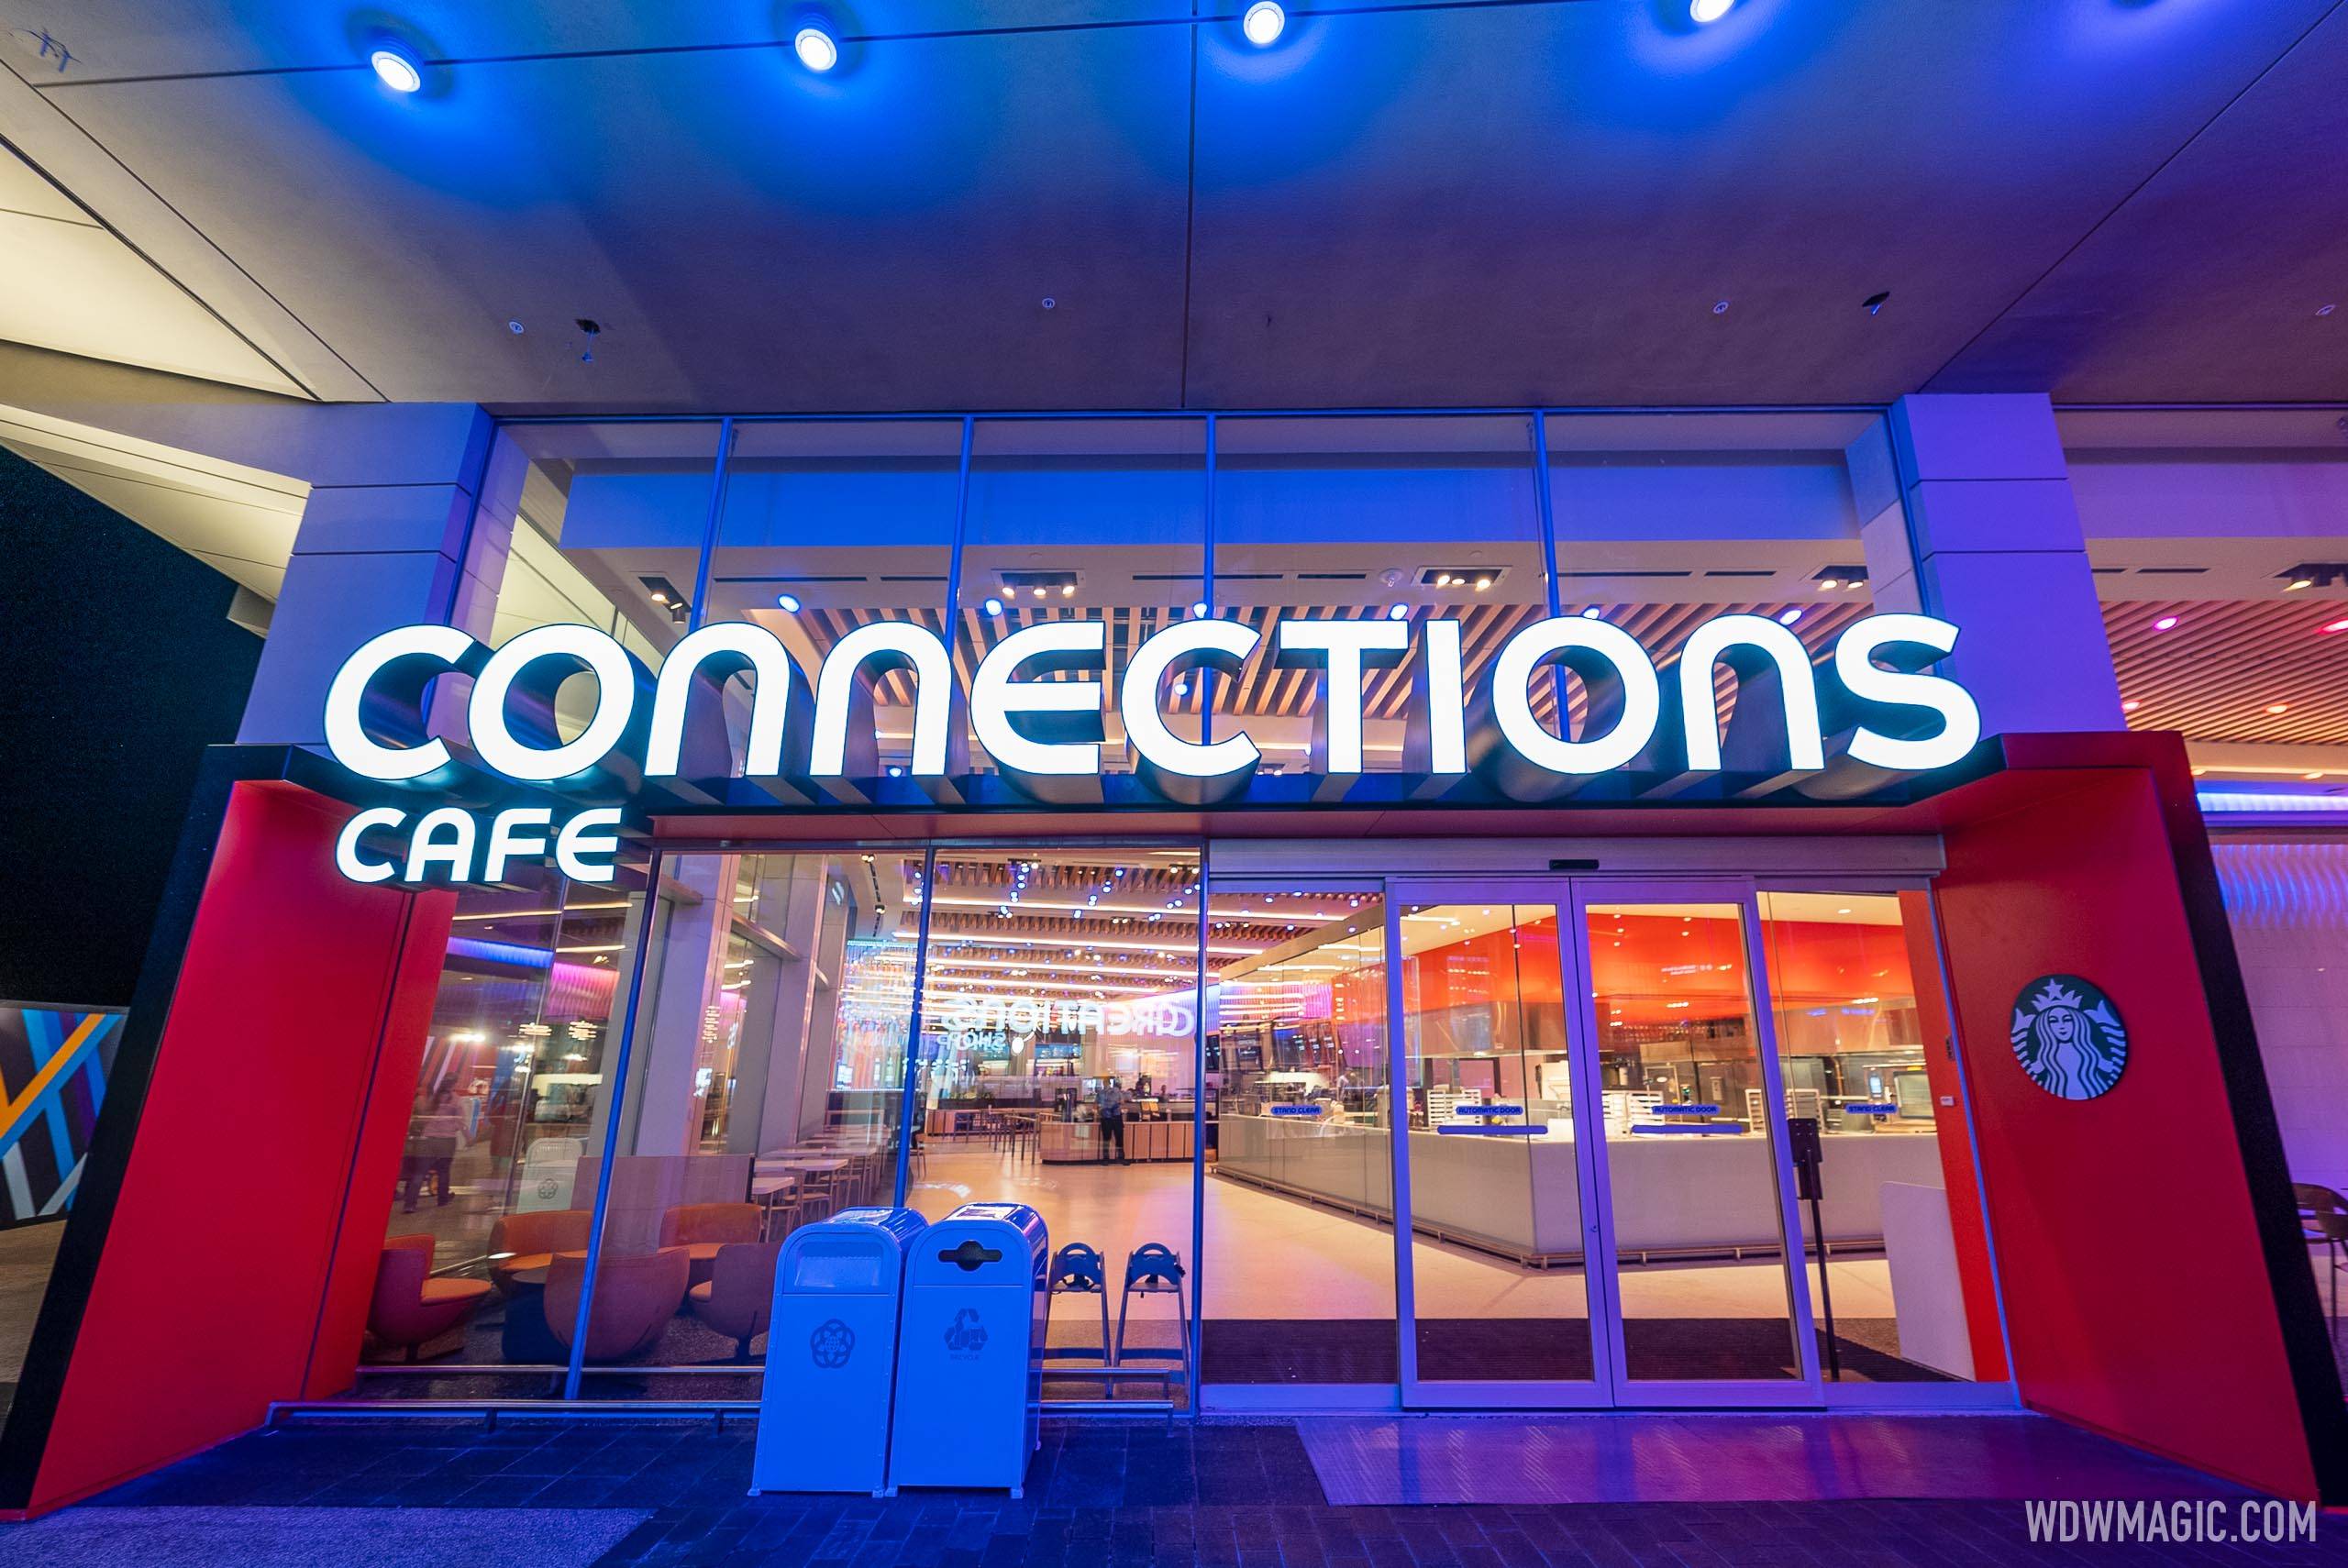 Connections Café and Eatery after dark